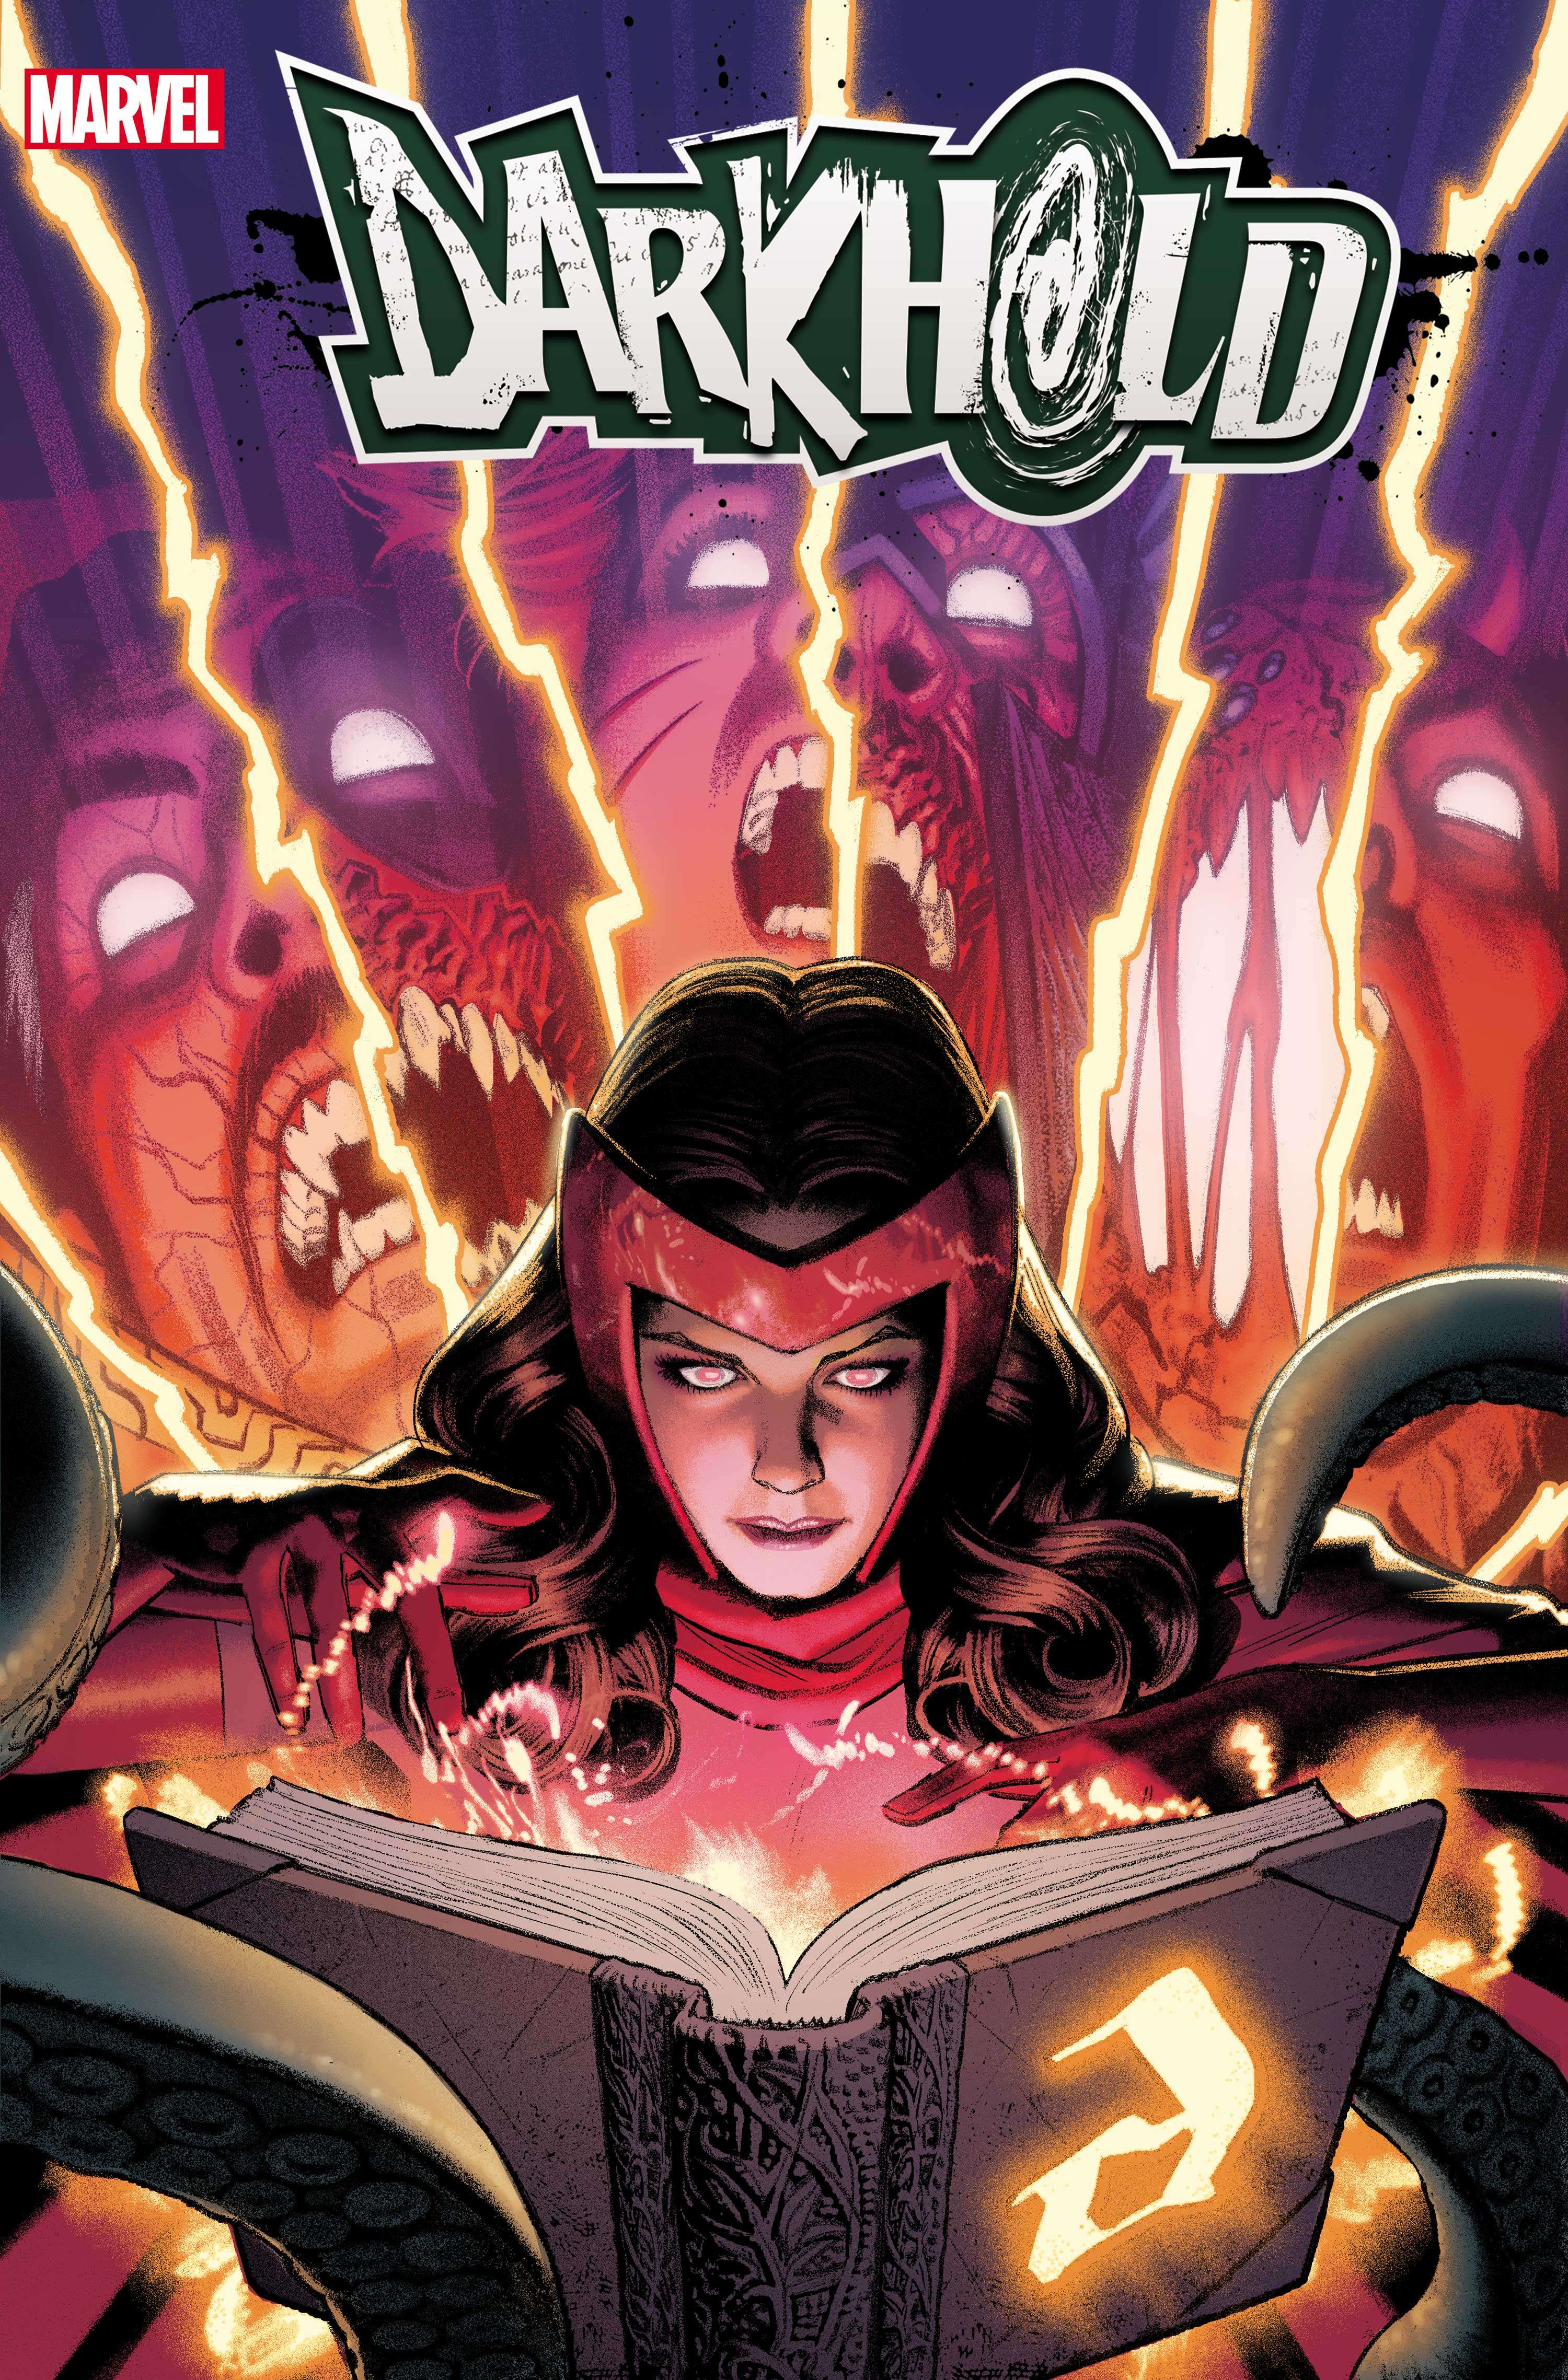 Exclusive: Writer Steve Orlando on 'rollercoaster' of Marvel's 'Darkhold'  event